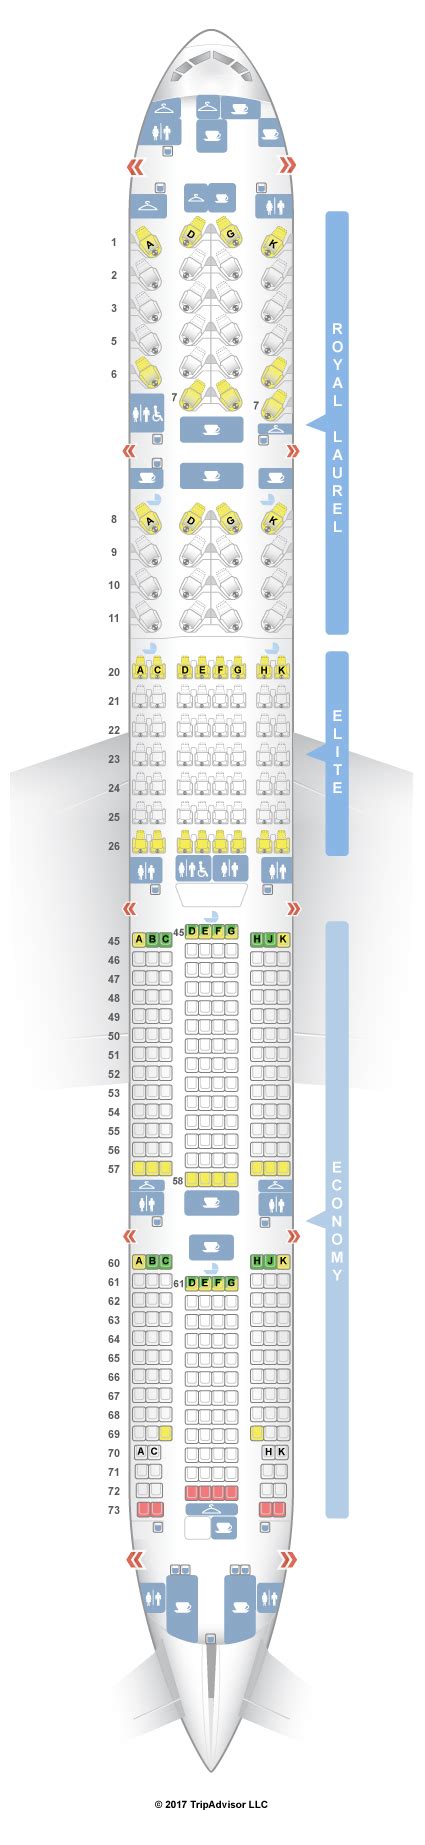 Once you have made a booking, you can see the actual seating layout for your flight and reserve a seat using manage my booking. air india boeing 777 300er seat map | Brokeasshome.com